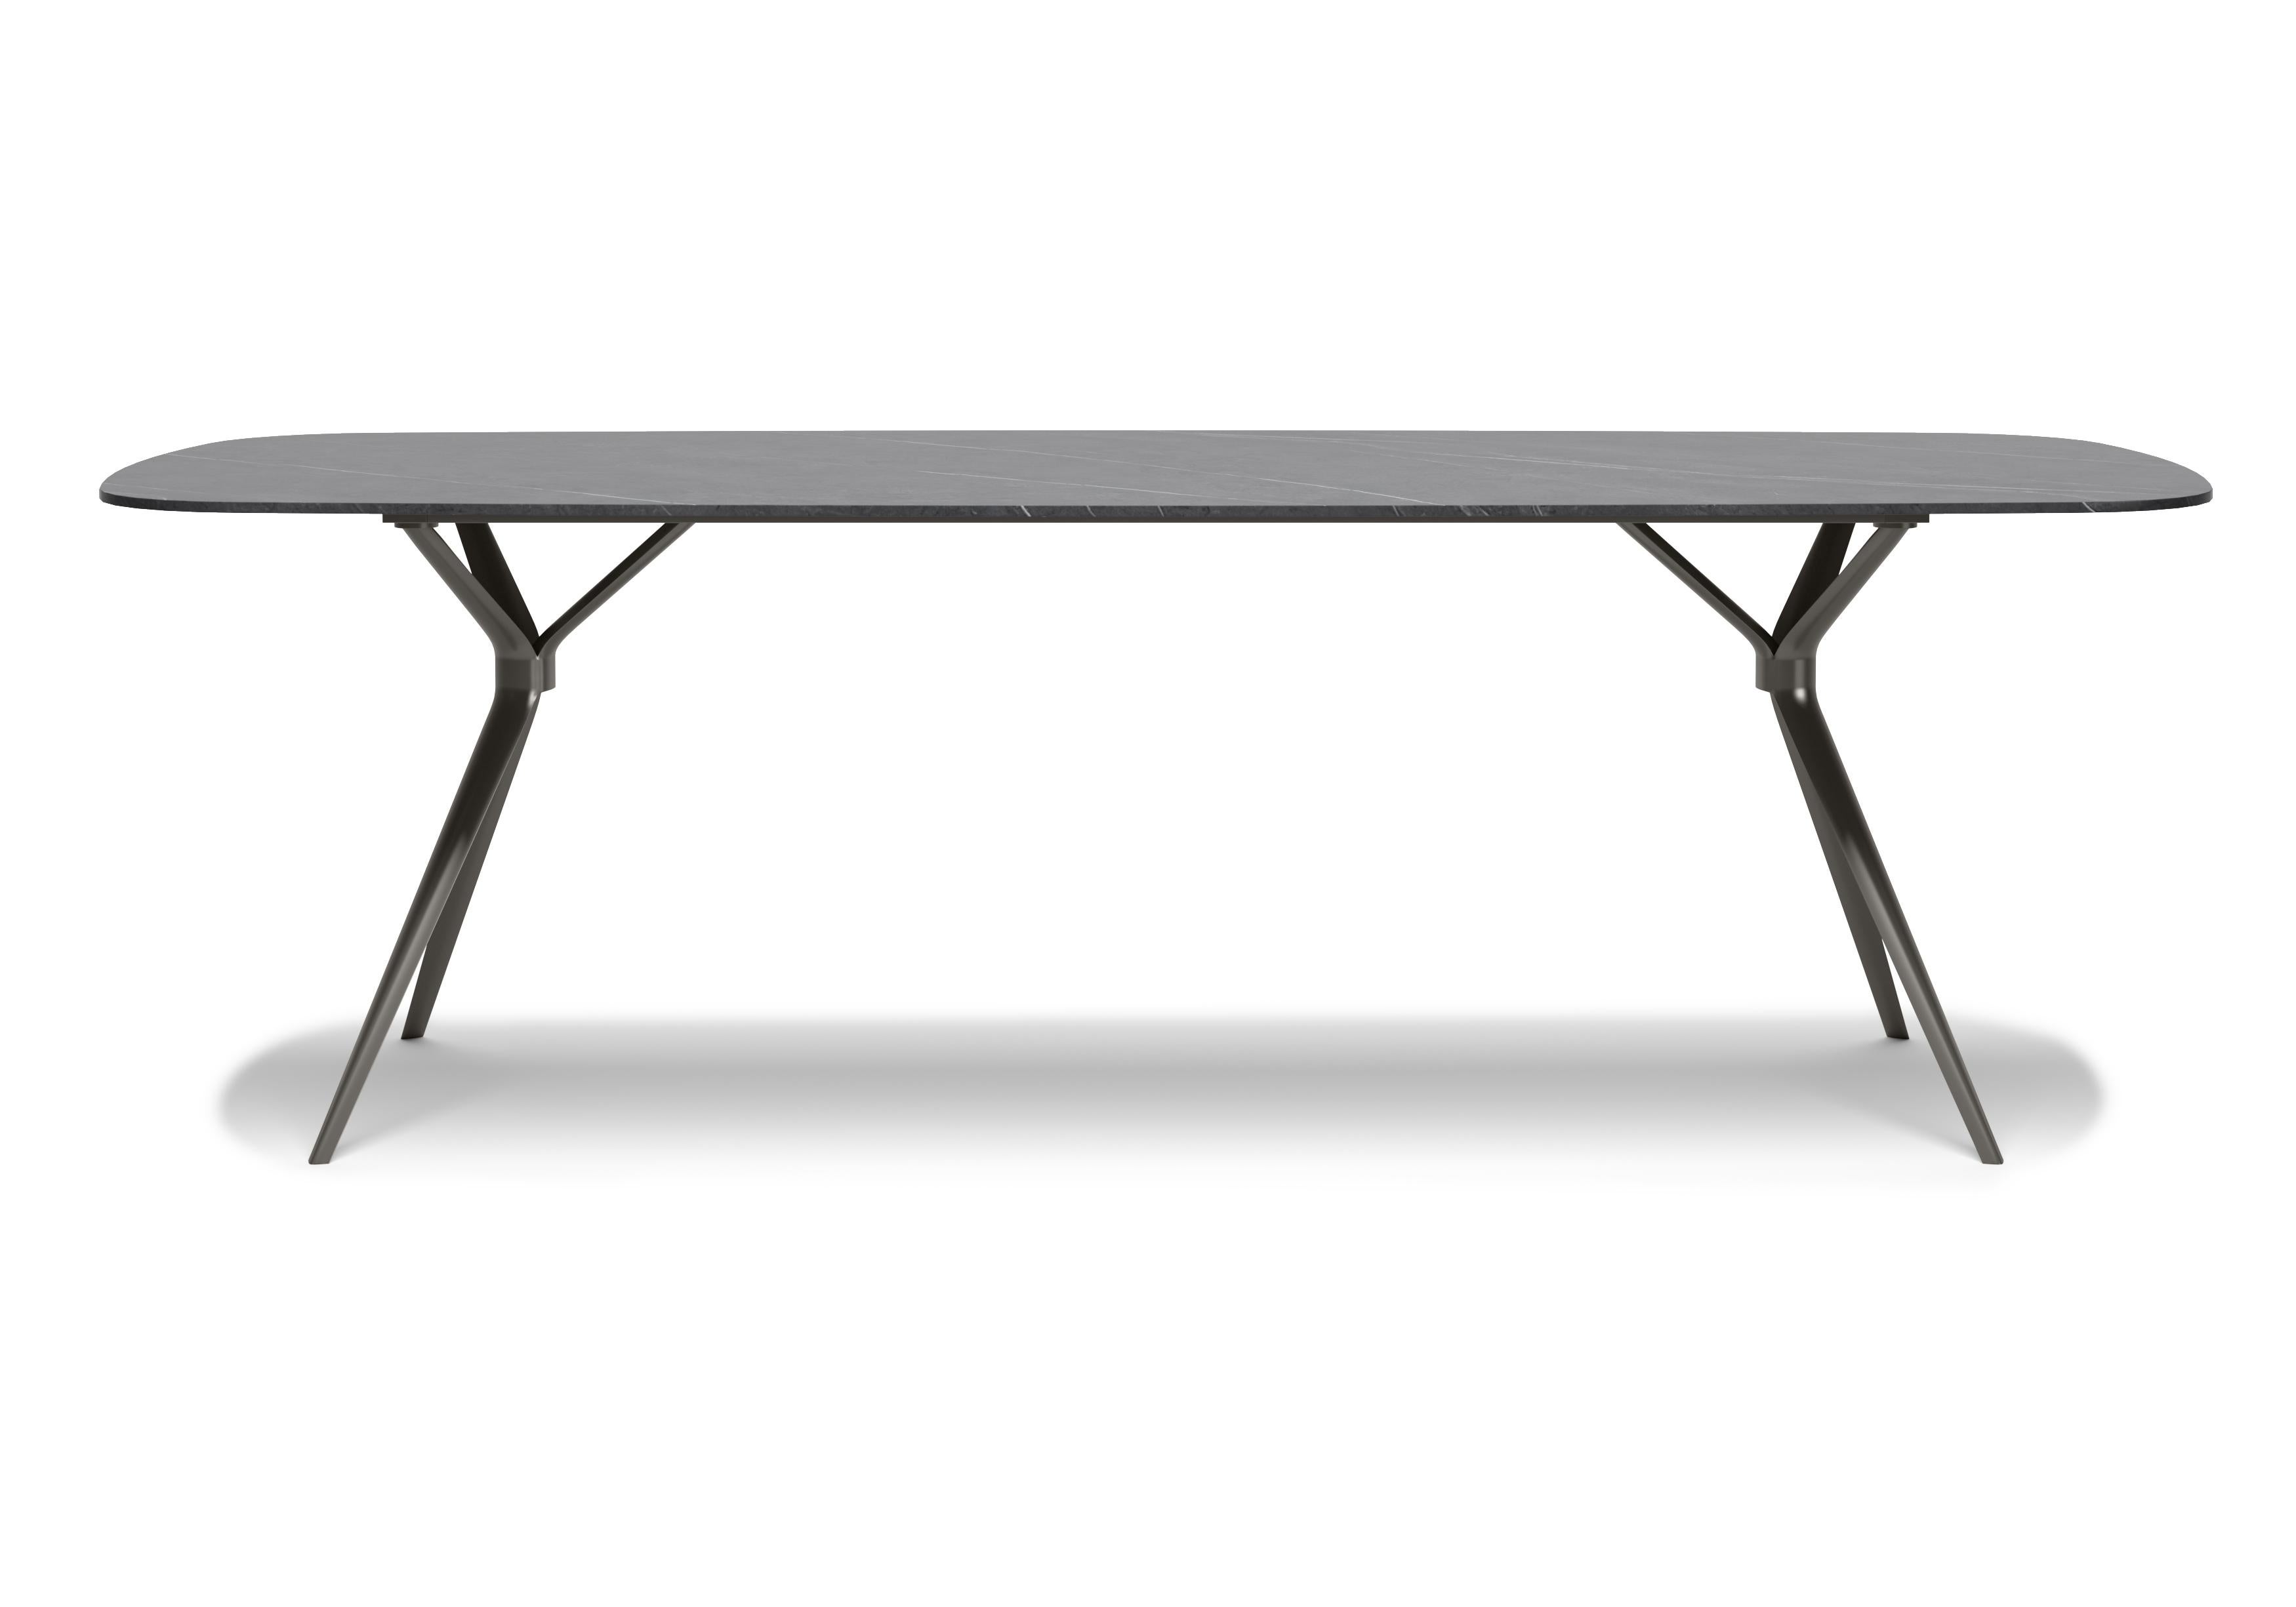 Gemma is a natural stone and aluminium garden table.‎
The Gemma Collection is a powerful sketch, synthesizes its rounded lines and comfort, it incorporates the power of contrast into the entire design and deepens the open space experience.‎ The